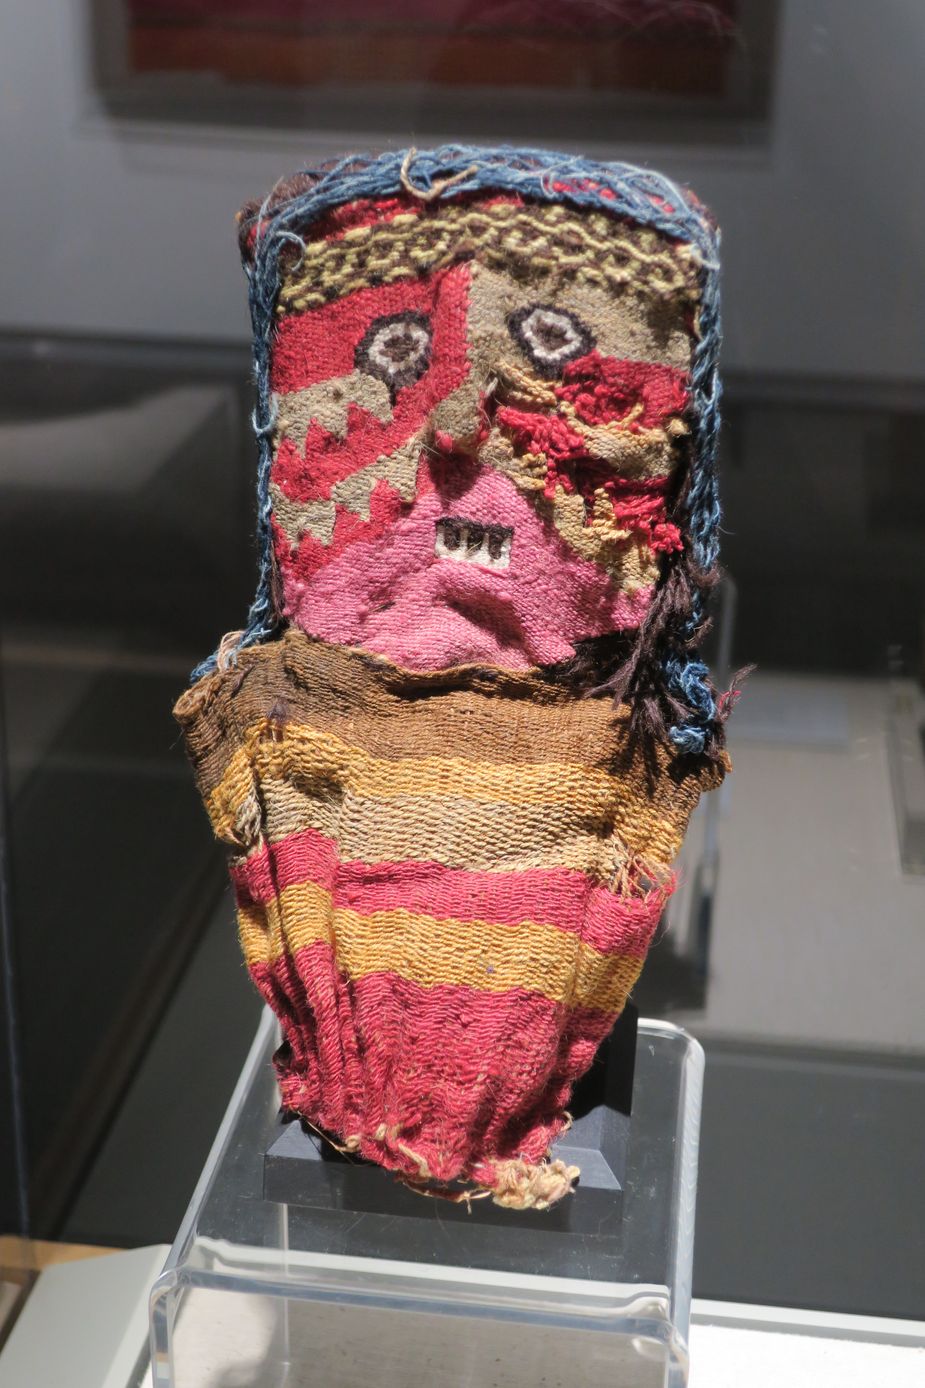 Fabric doll made of cotton and camelid wools from Peru’s central coast, circa 1000-1400 (Chancay period) Photo by Megan Rossman